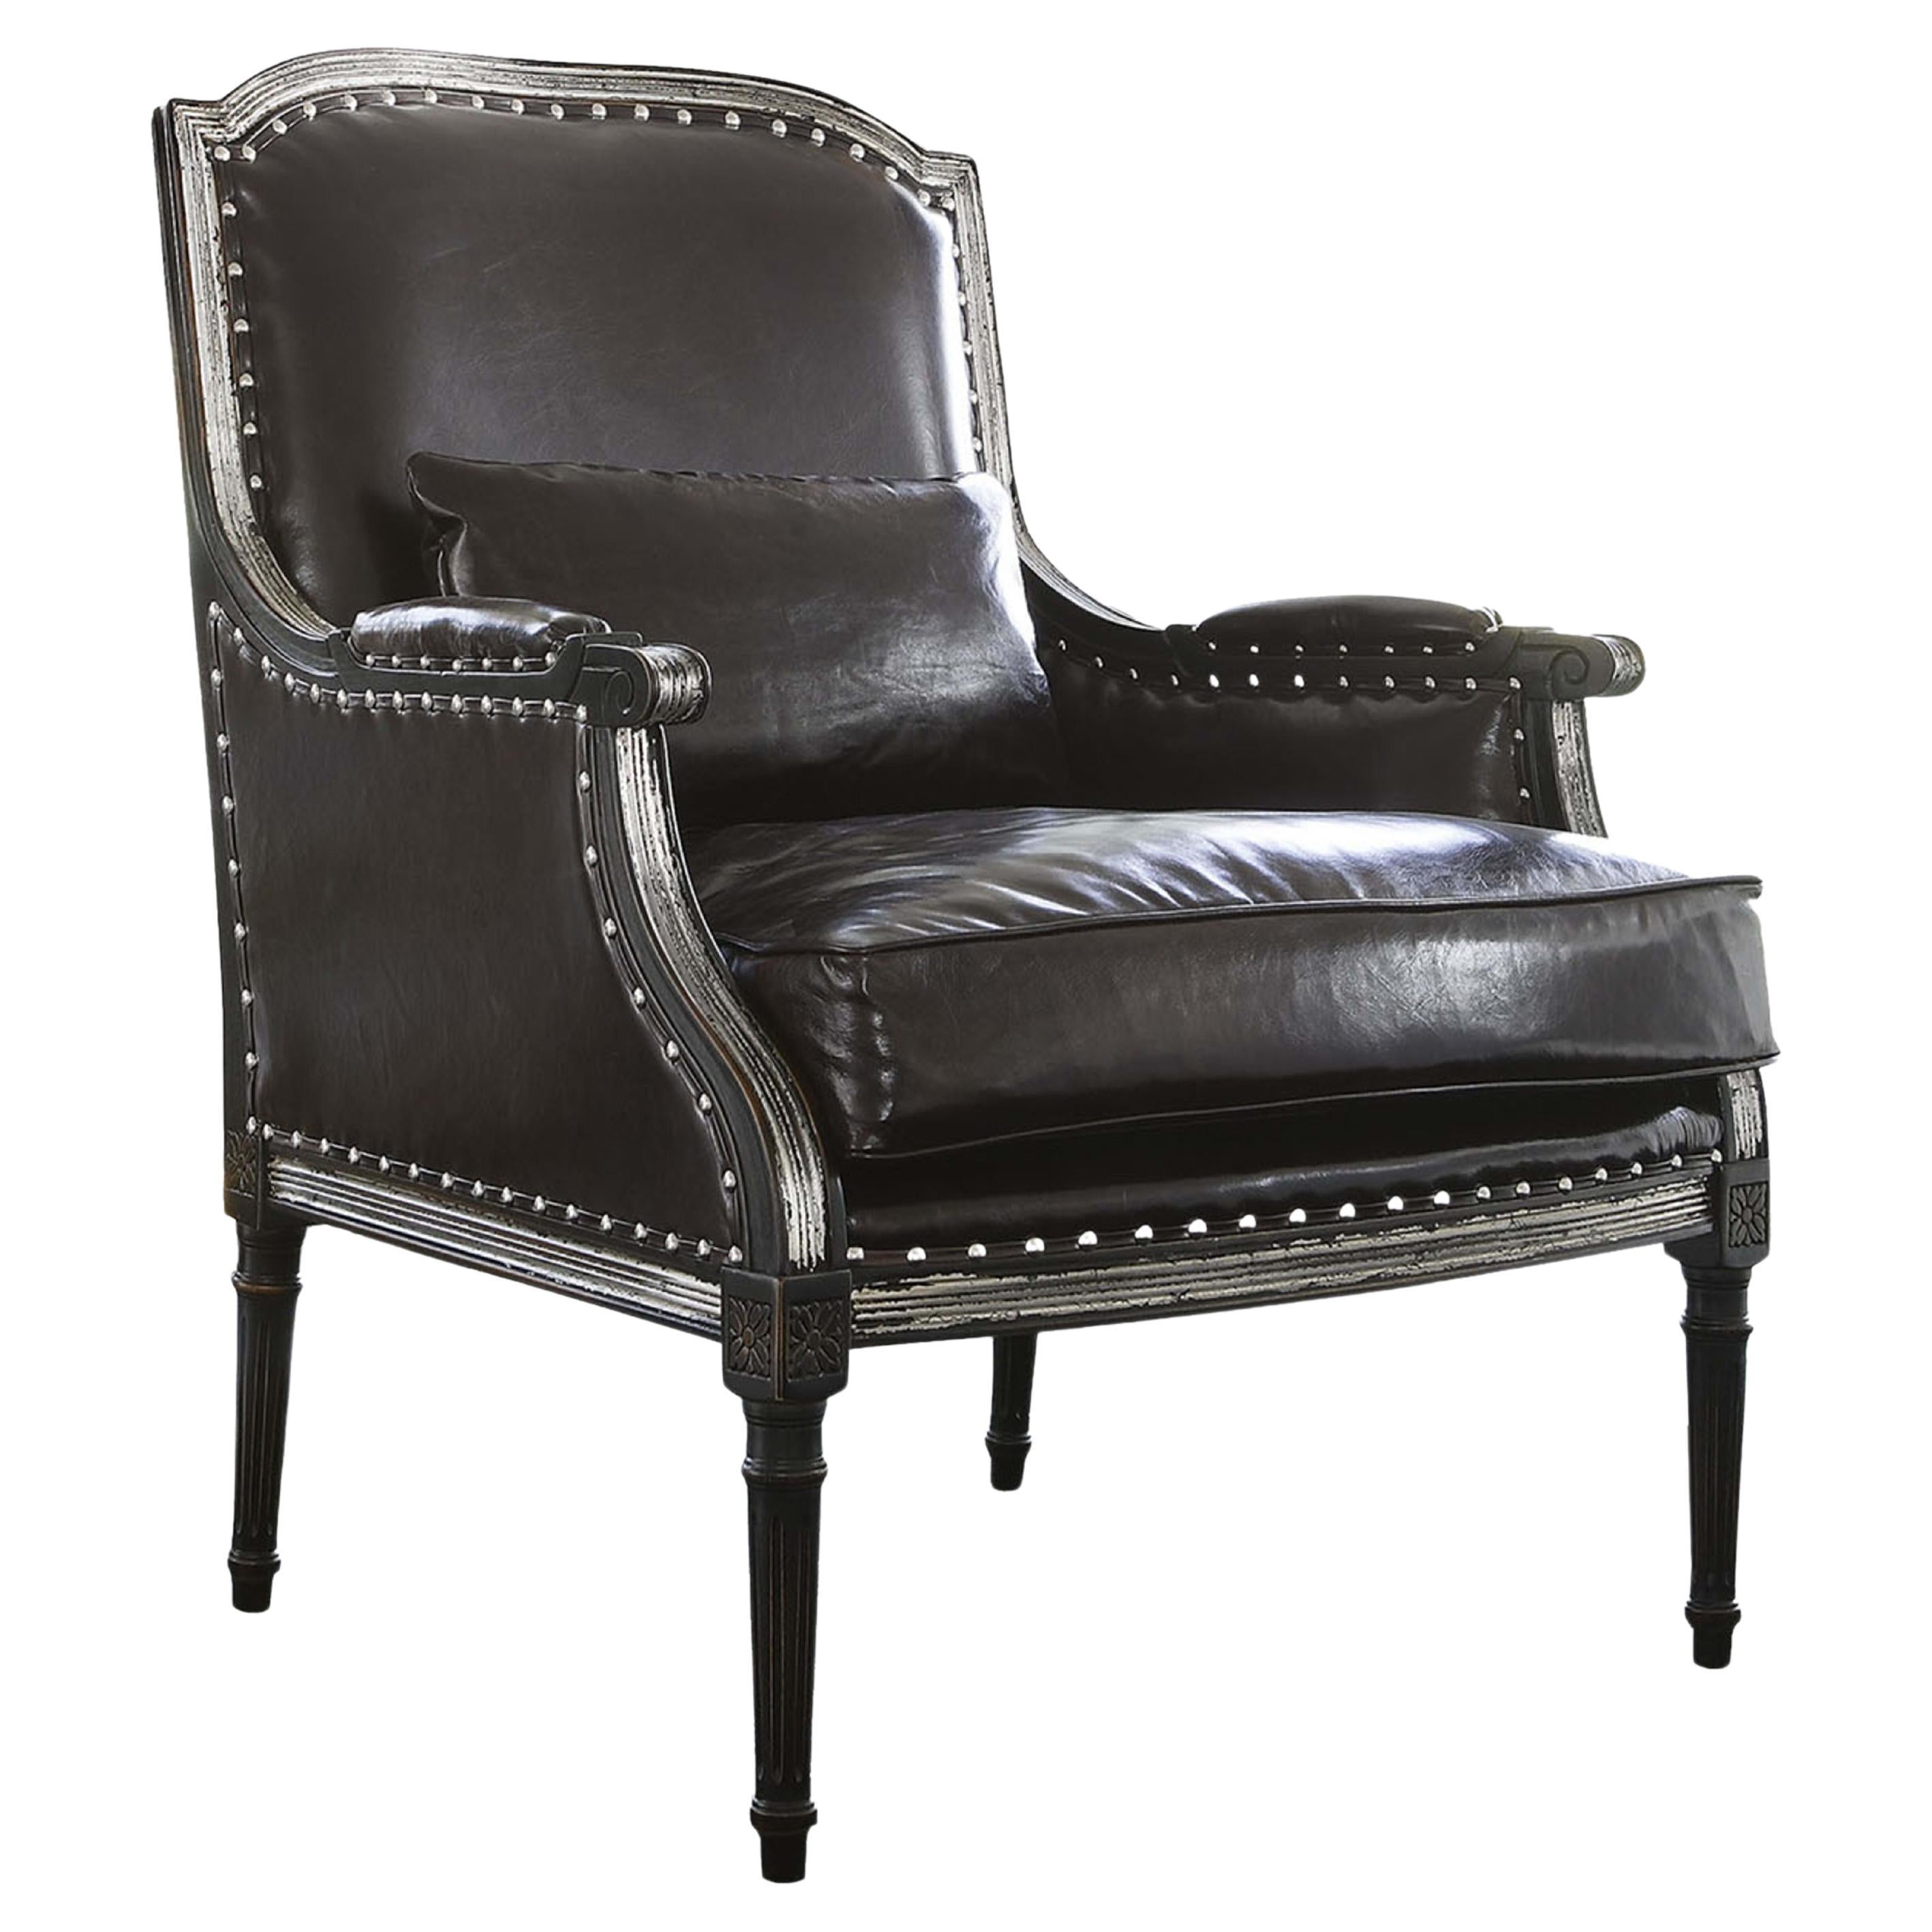 Black Leather Armchair For Sale